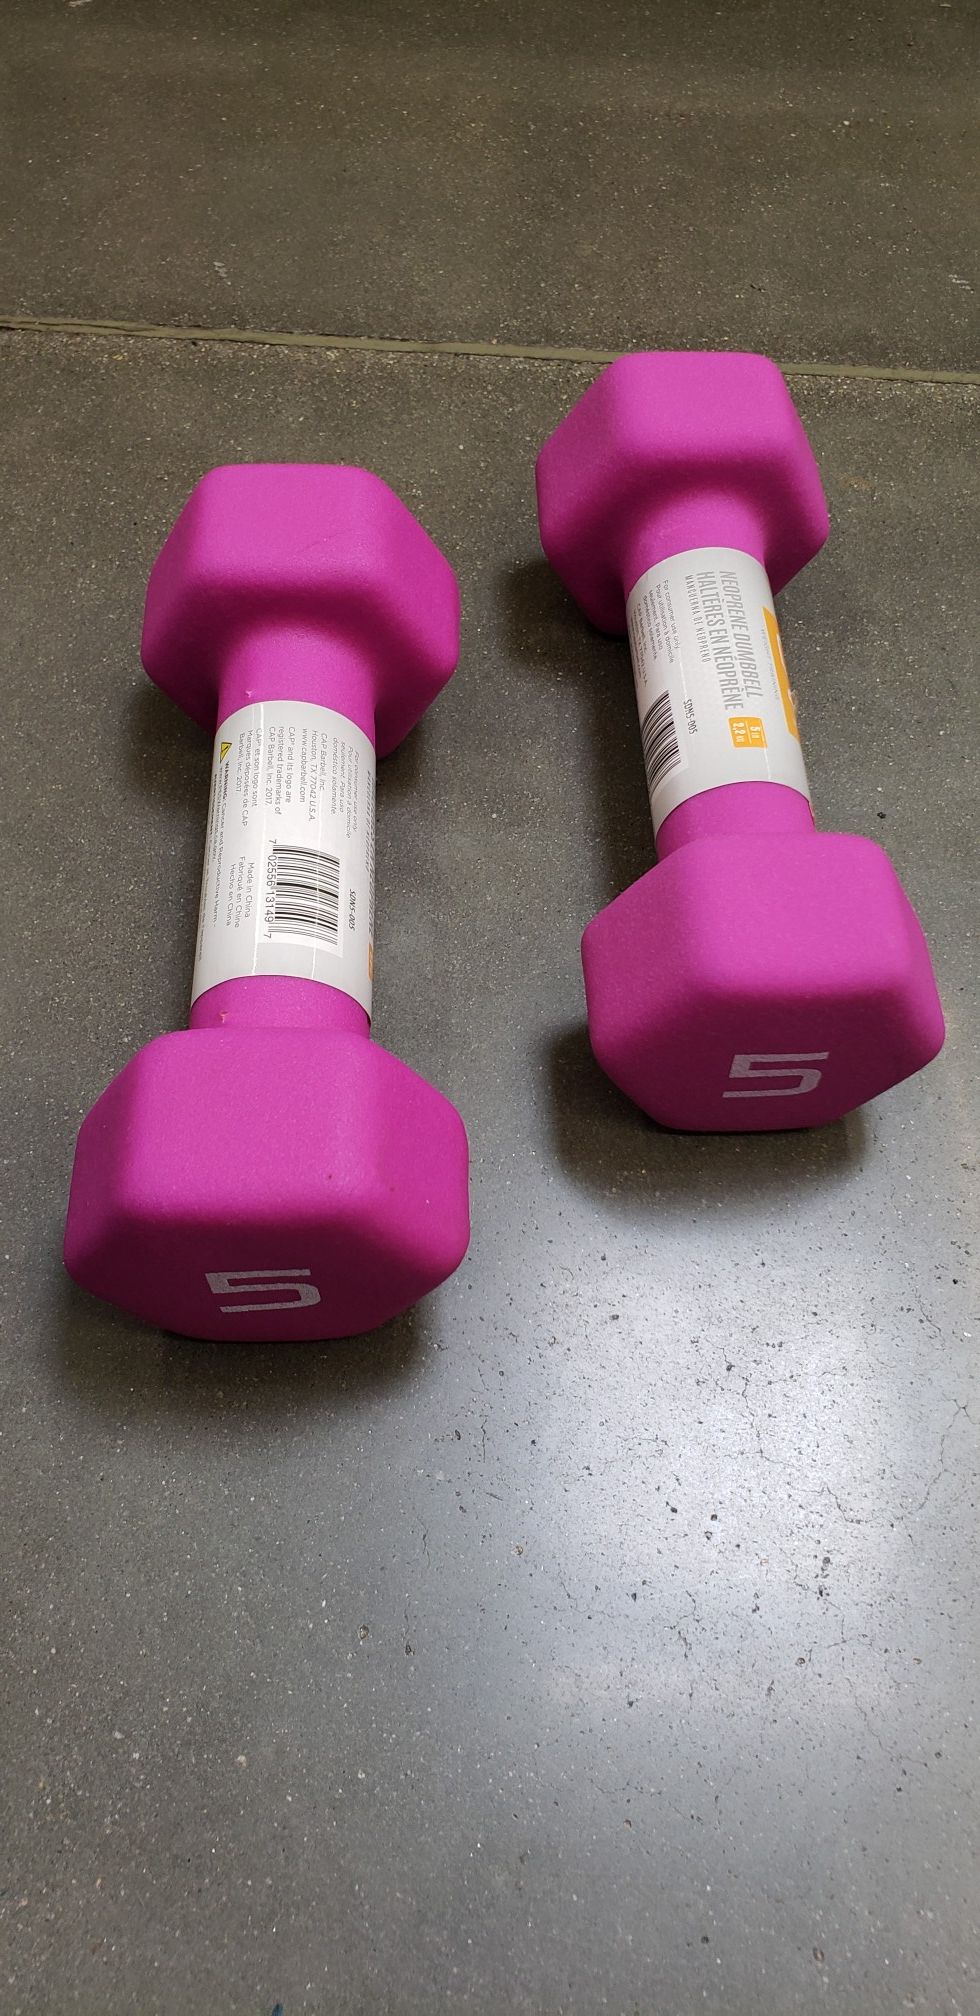 5lbs Pounds Dumbbells Hand Weights